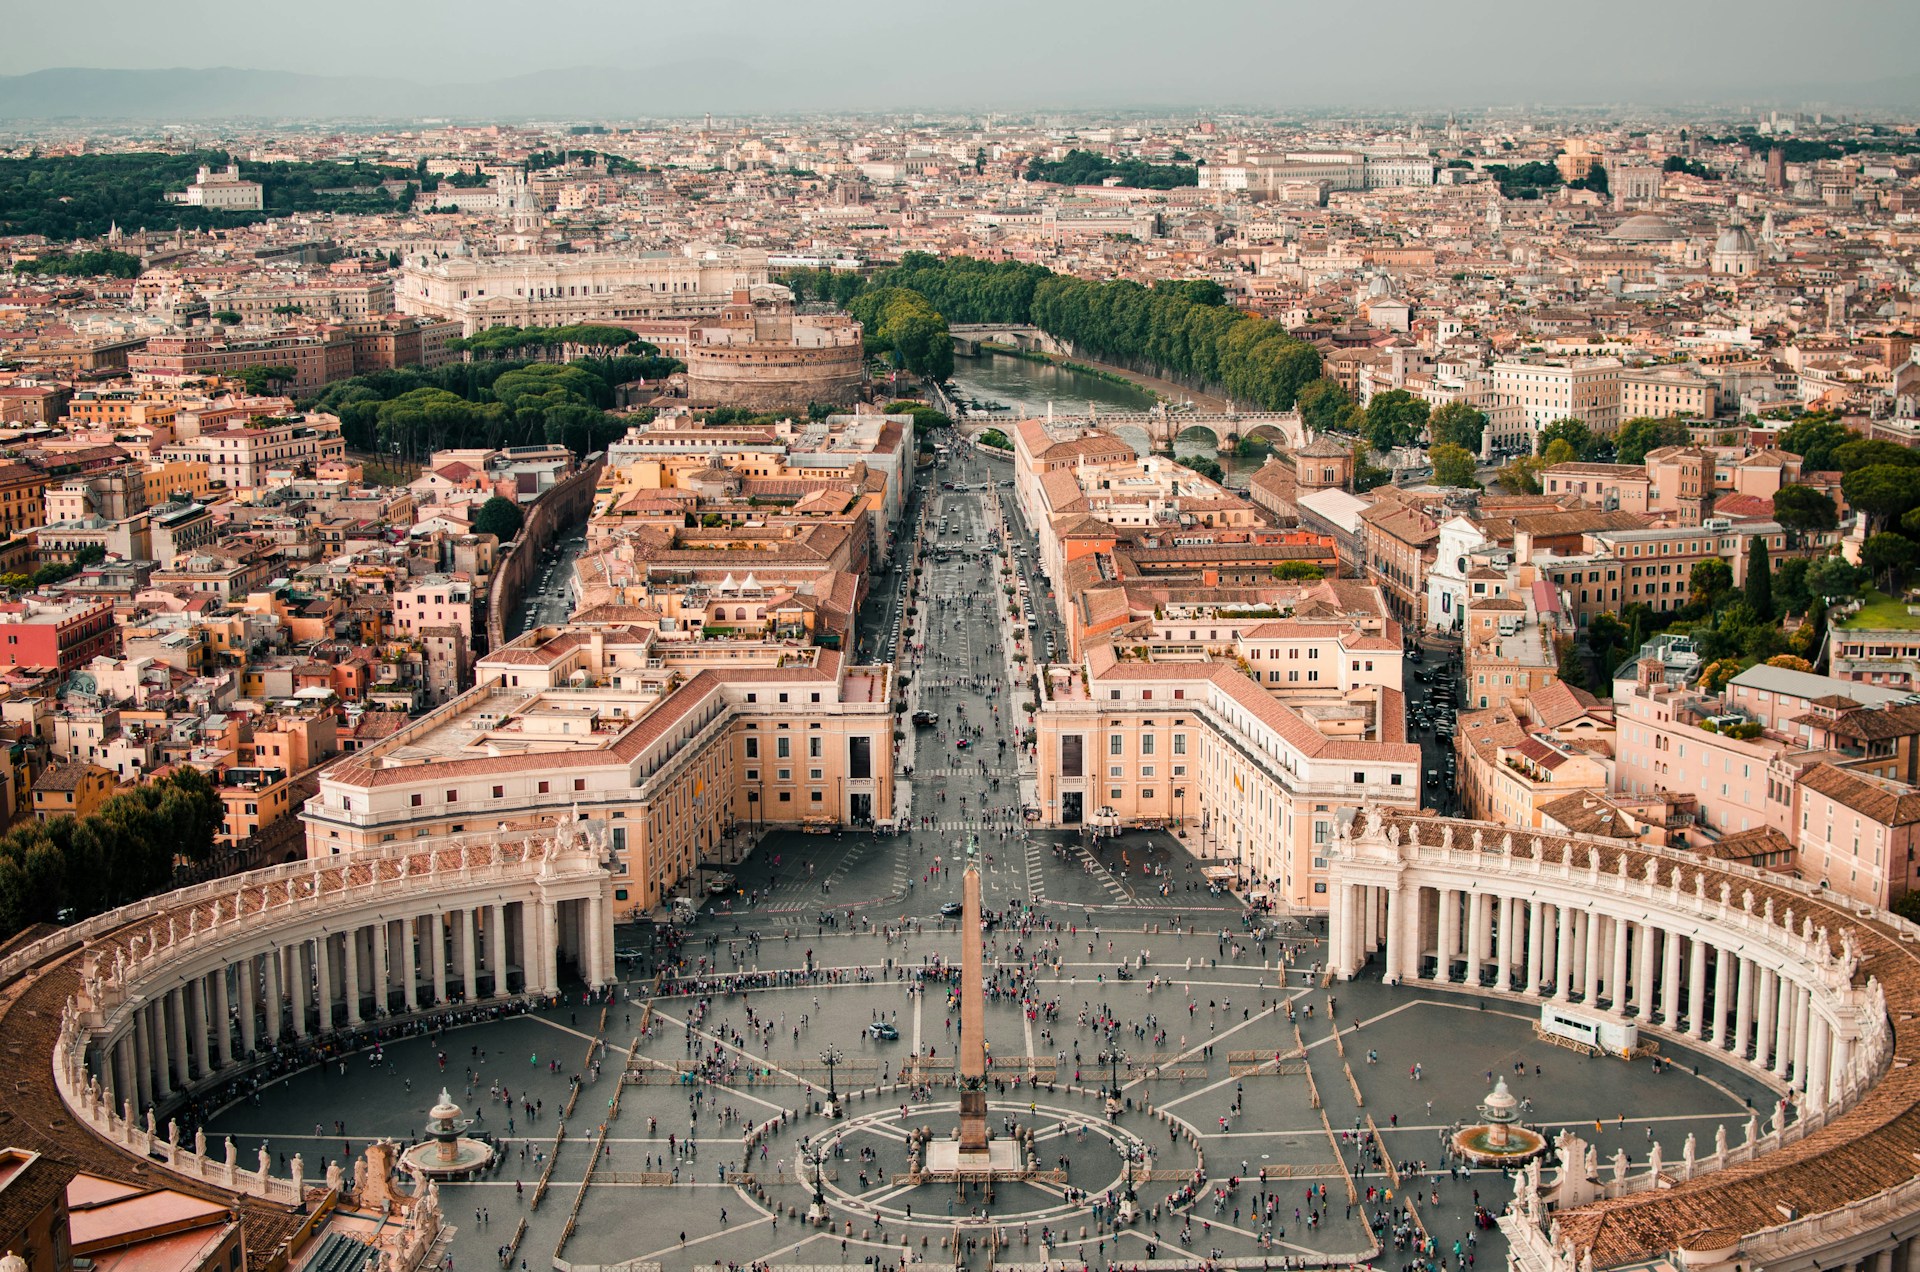 View of Saint Peter's Square, taken from the top of the Saint Peter's Basilica